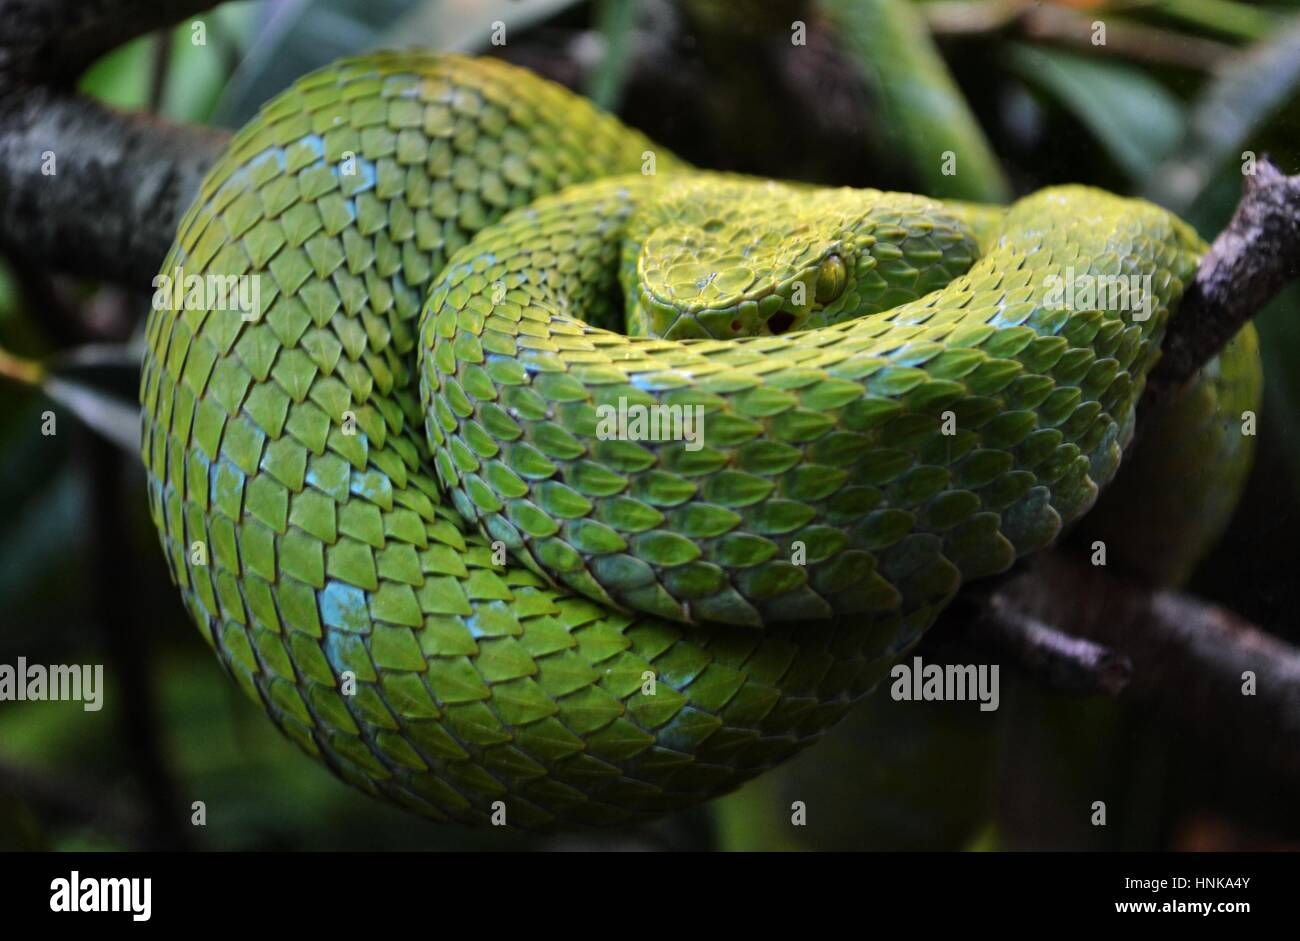 The Mexican Palm Pit Viper - Rowley's Palm Pit Viper (Bothriechis rowleyi) is a venomous green pit viper species found in Mexico. Stock Photo